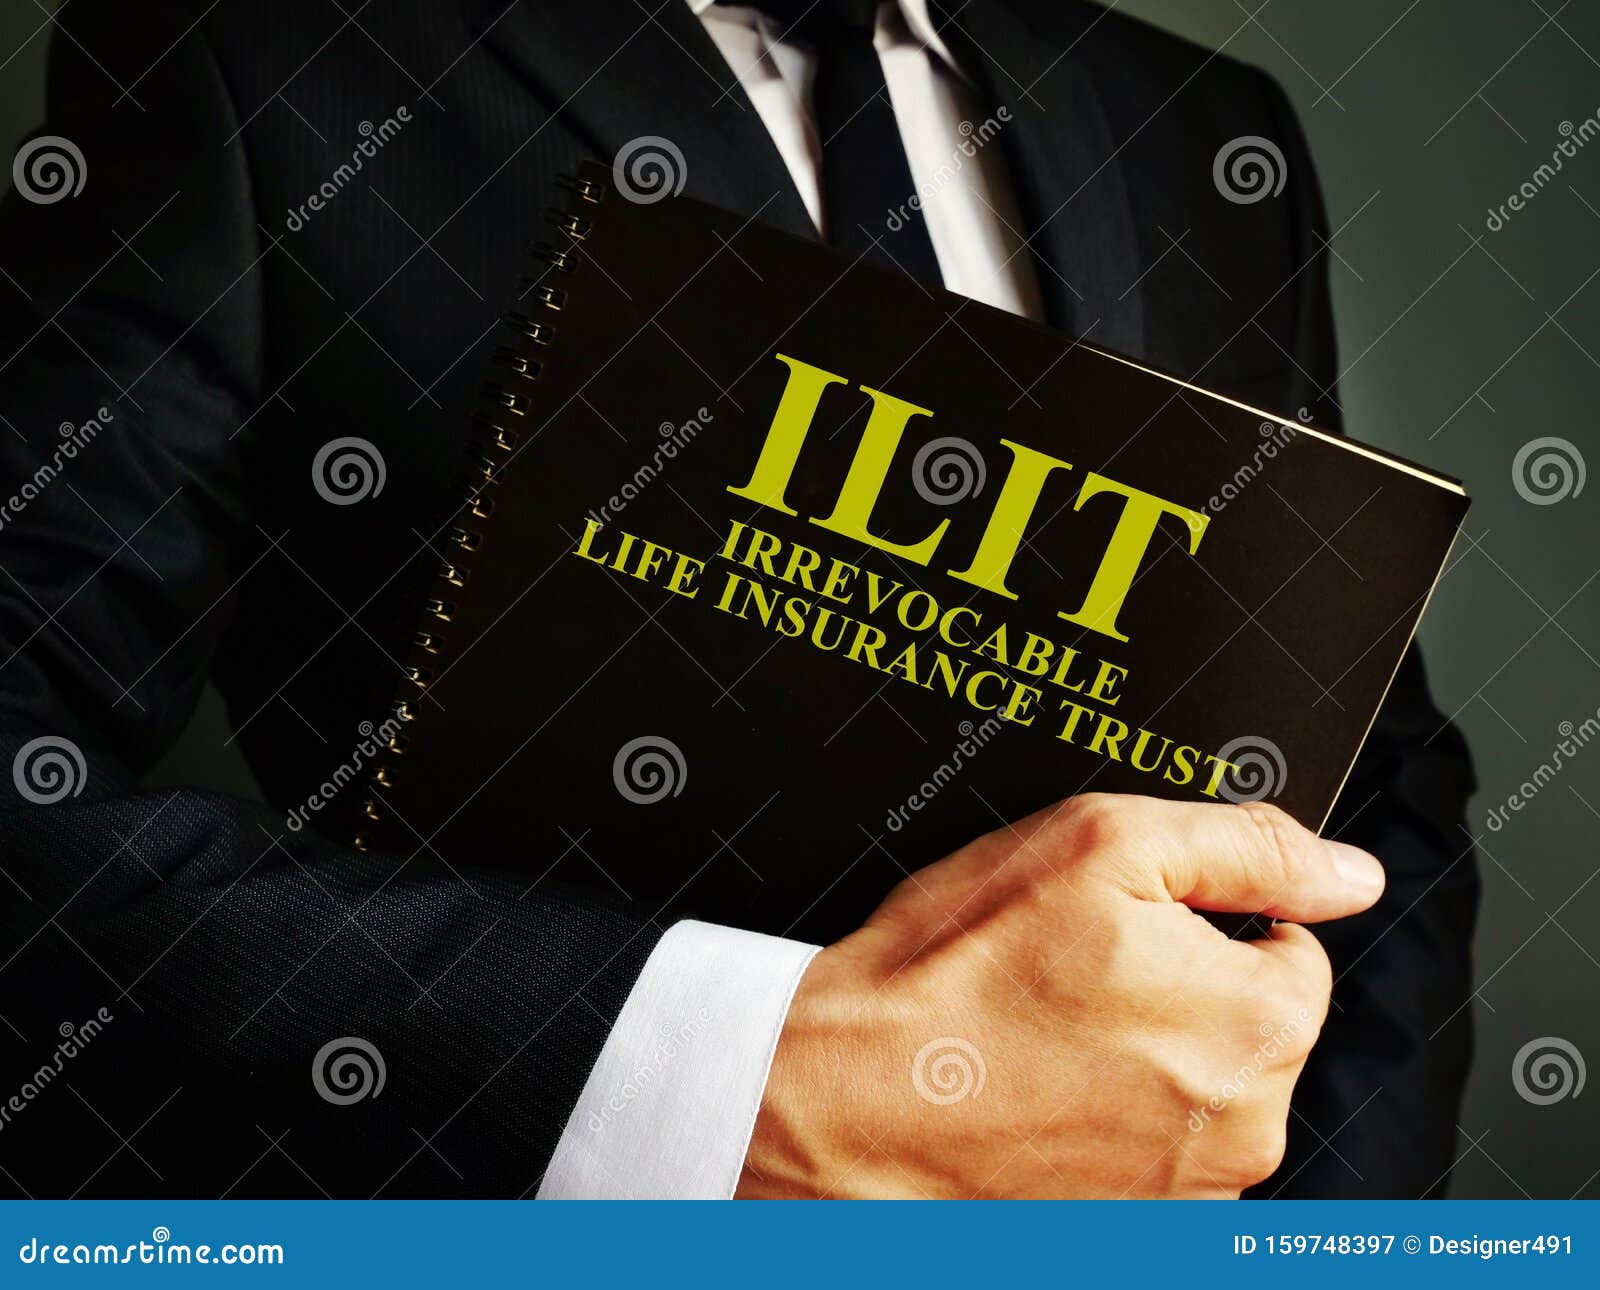 Irrevocable Trust Stock Photos - Download 6 Royalty Free ...